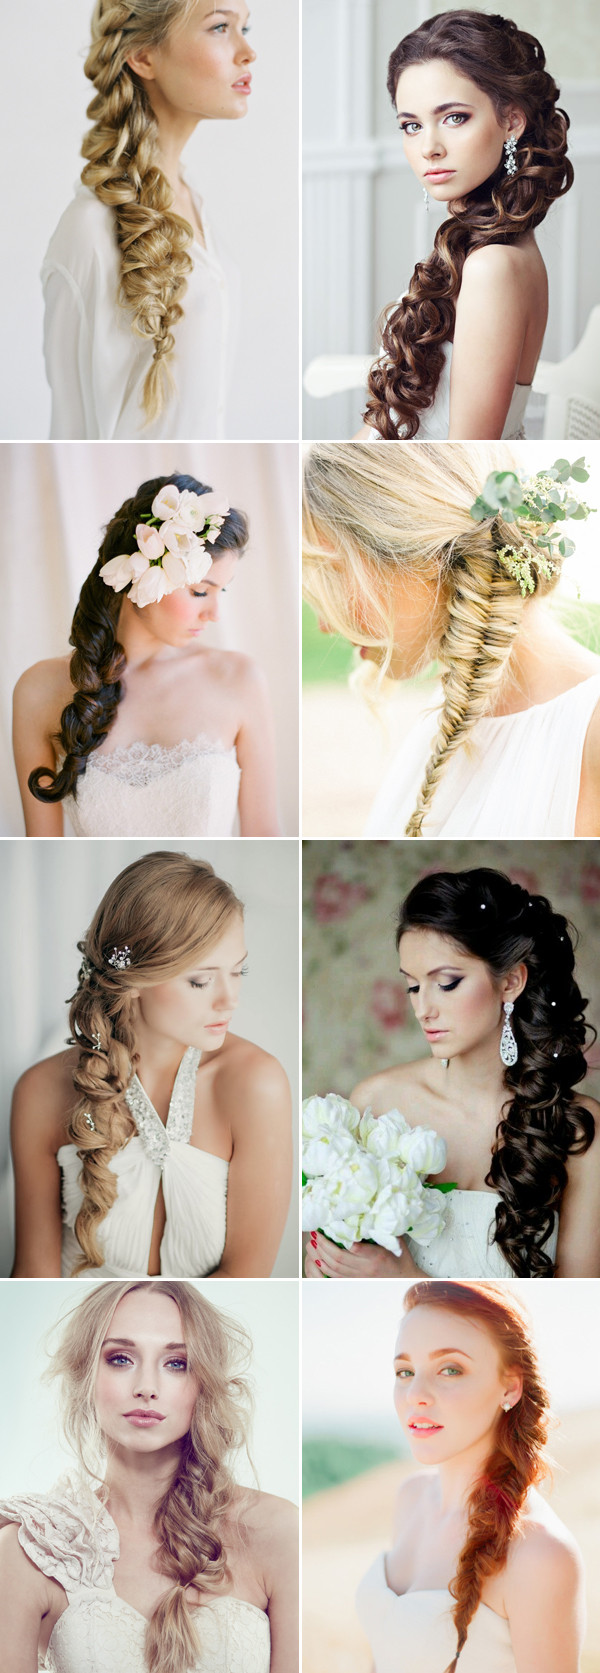 Side Swept Hairstyle For Wedding
 42 Steal Worthy Wedding Hairstyles for Long Hair